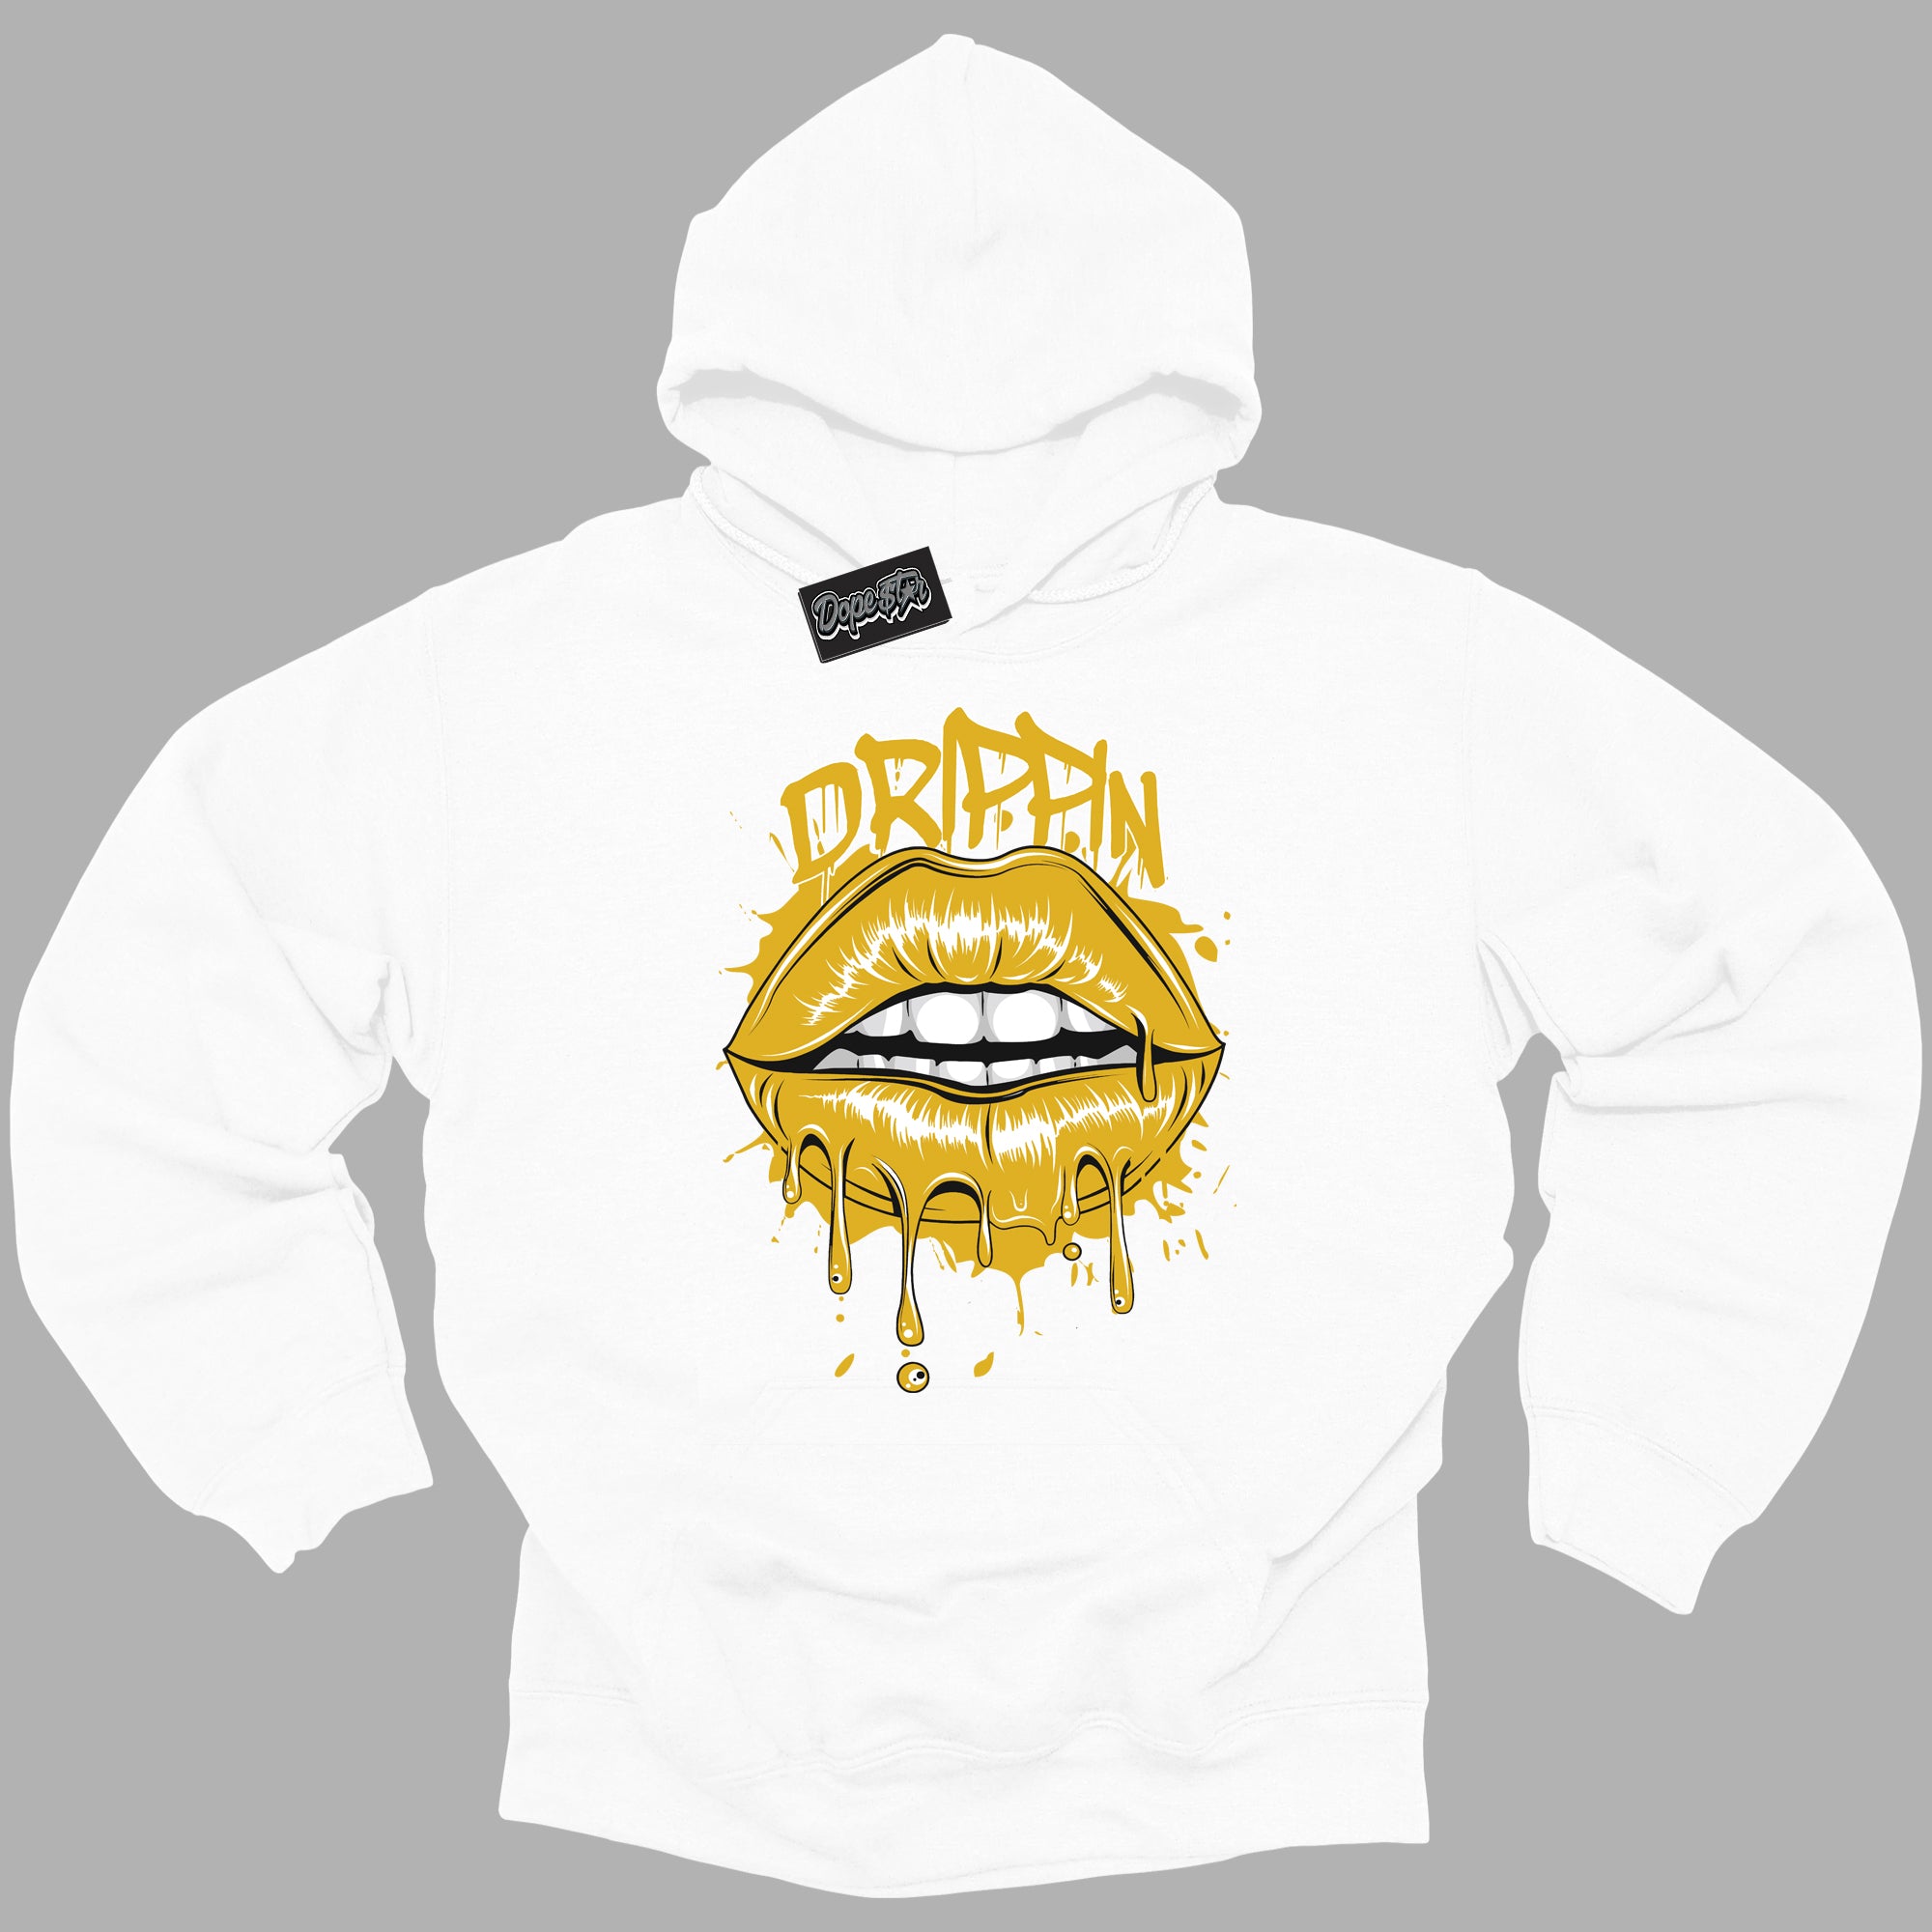 Cool White Hoodie with “ Drippin ”  design that Perfectly Matches Yellow Ochre 6s Sneakers.